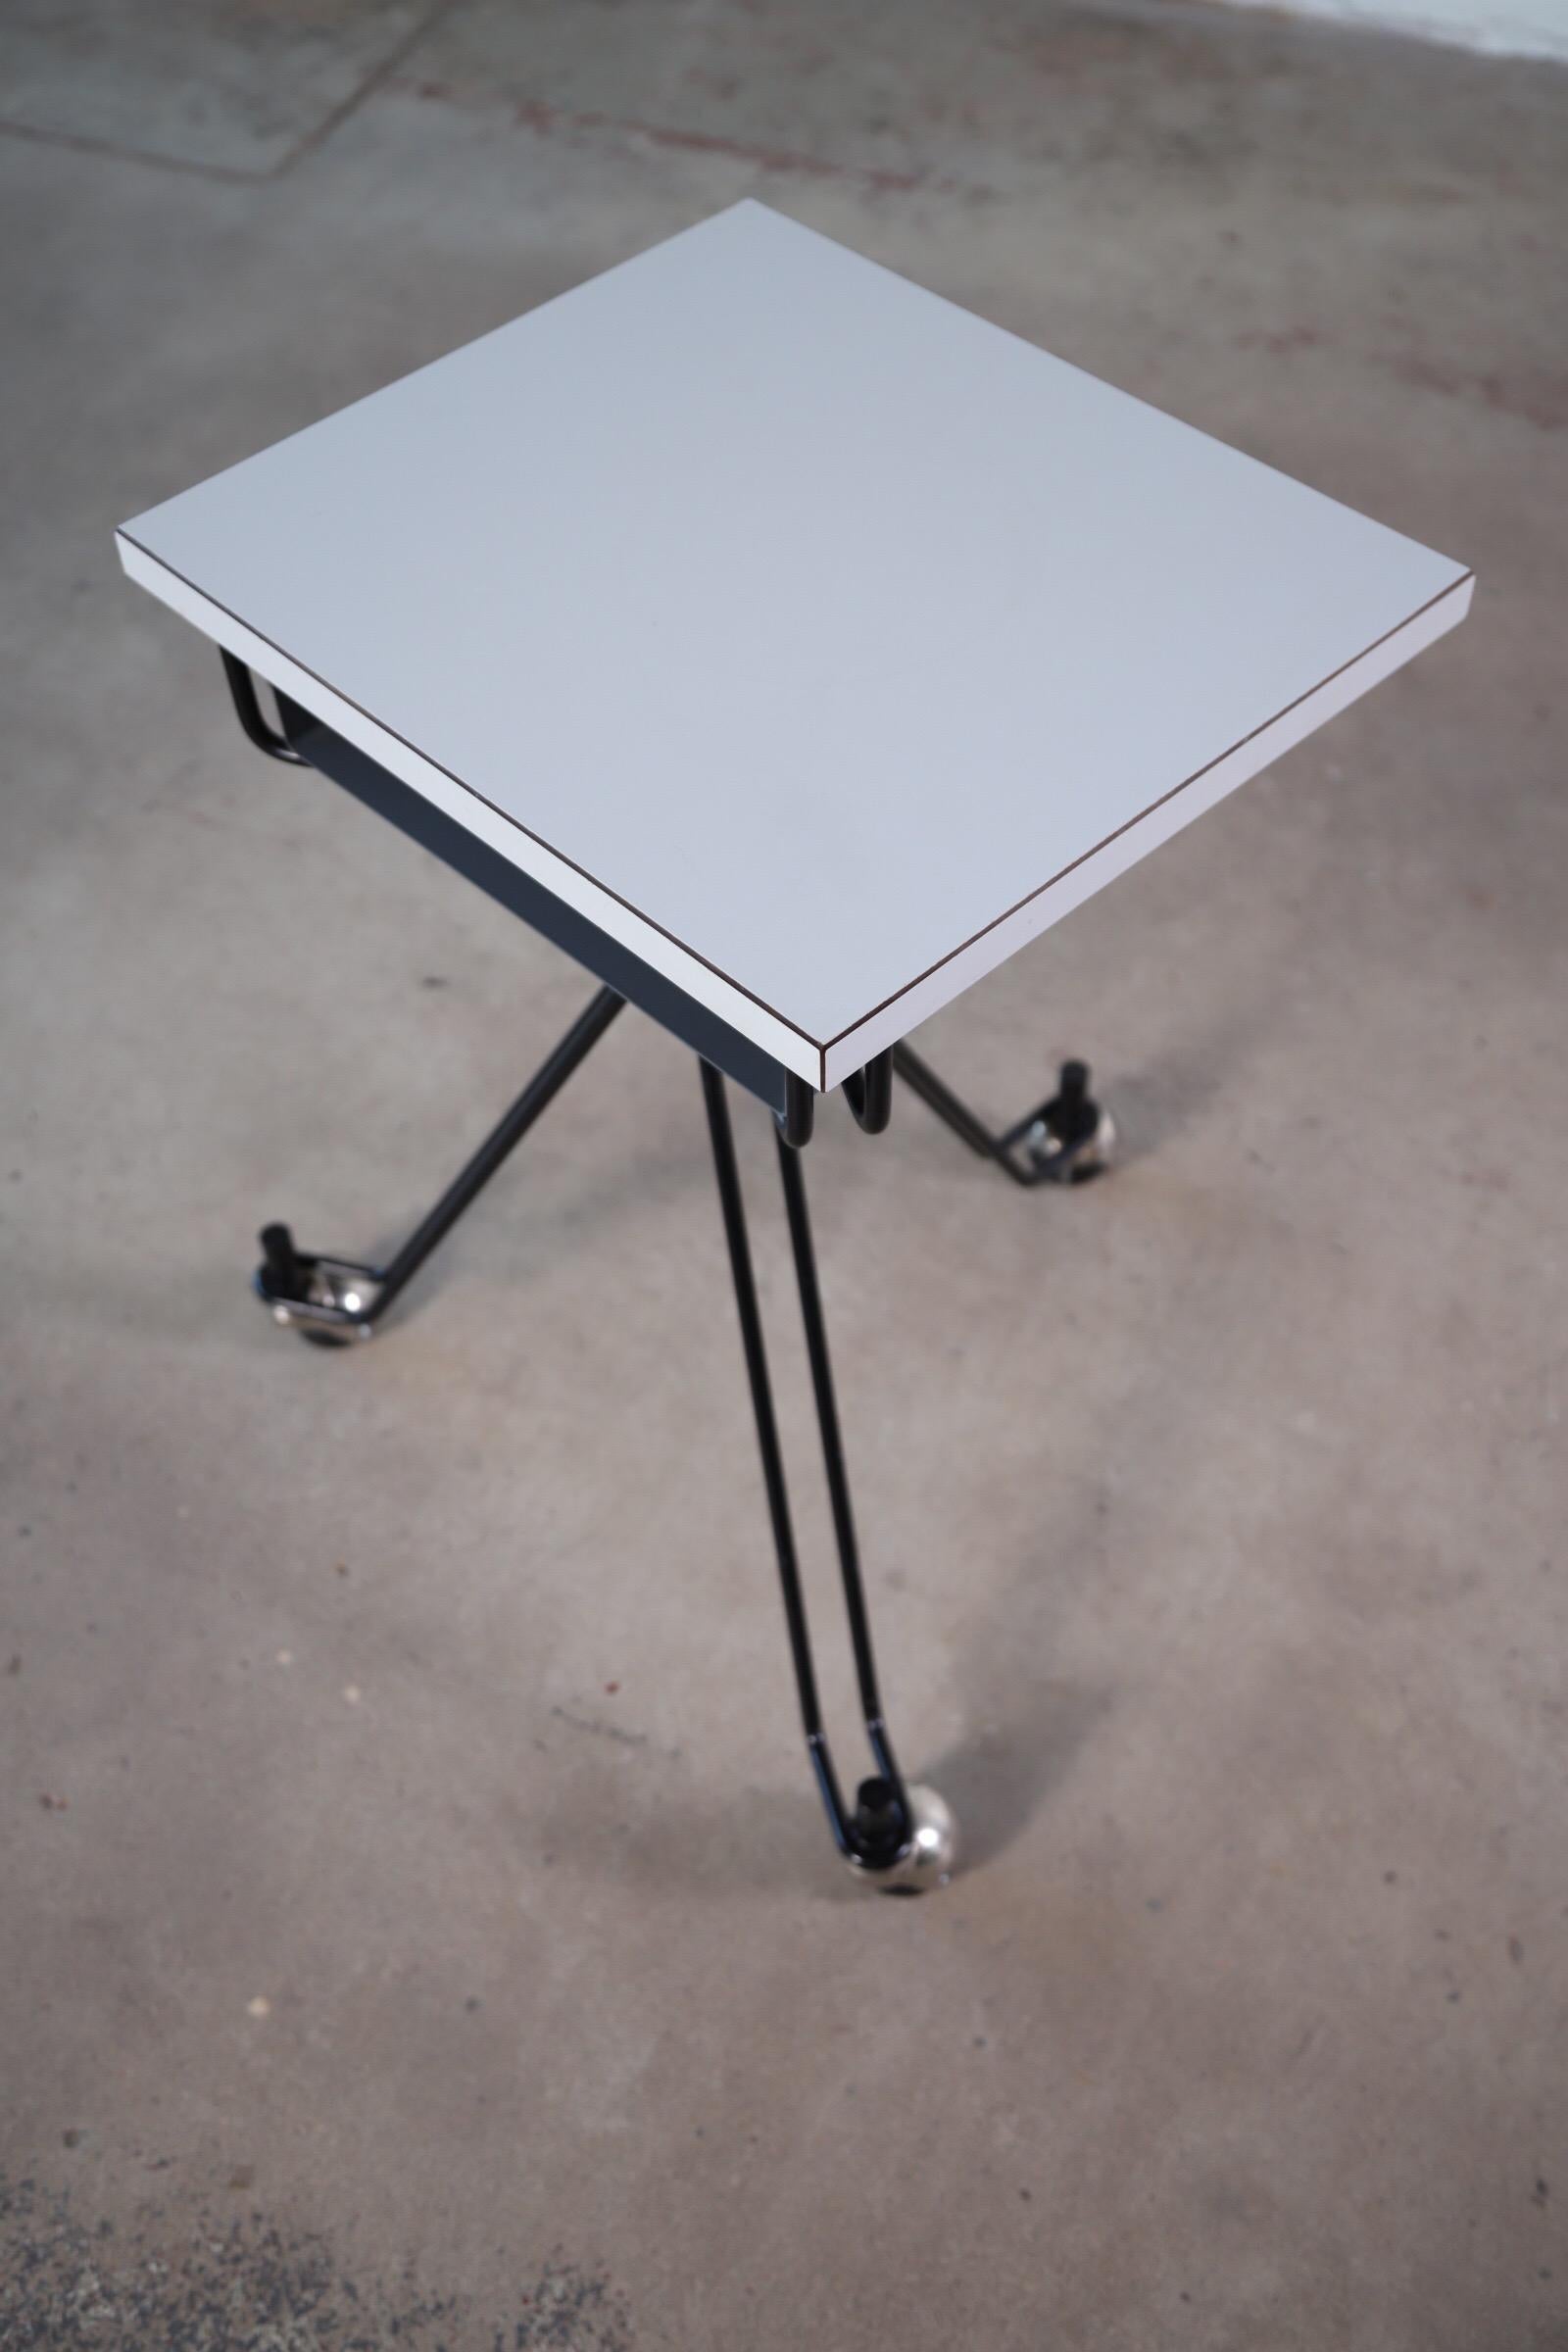 The three legged typewriter table by Eliot Noyes for IBM. A super utilitarian table on wheels. If you use a Macbook or any laptop computer, this sleek design makes for the best little work table while on the sofa. The three leg design makes for easy